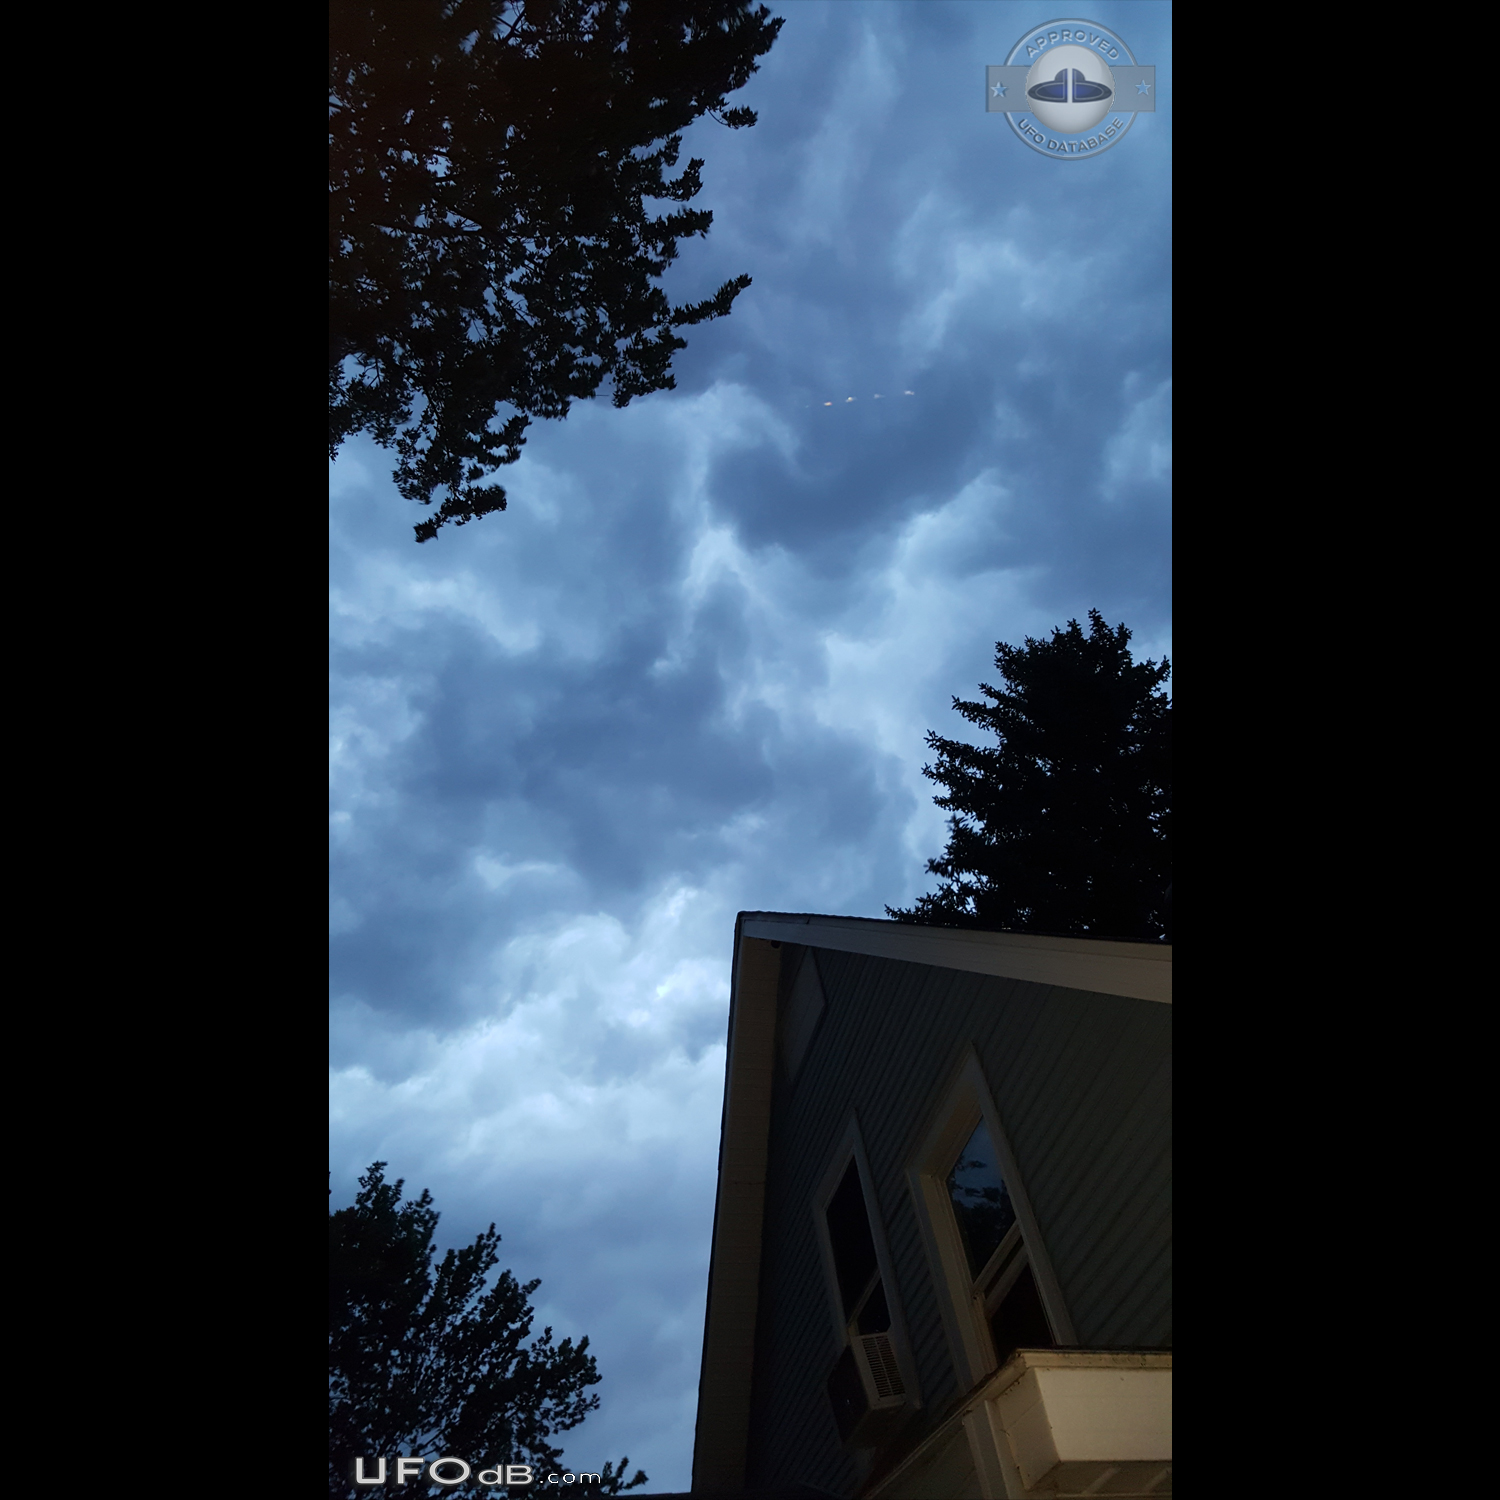 Looked like 5 disks UFOs appeared then disappeared just as fast - Indi UFO Picture #800-1